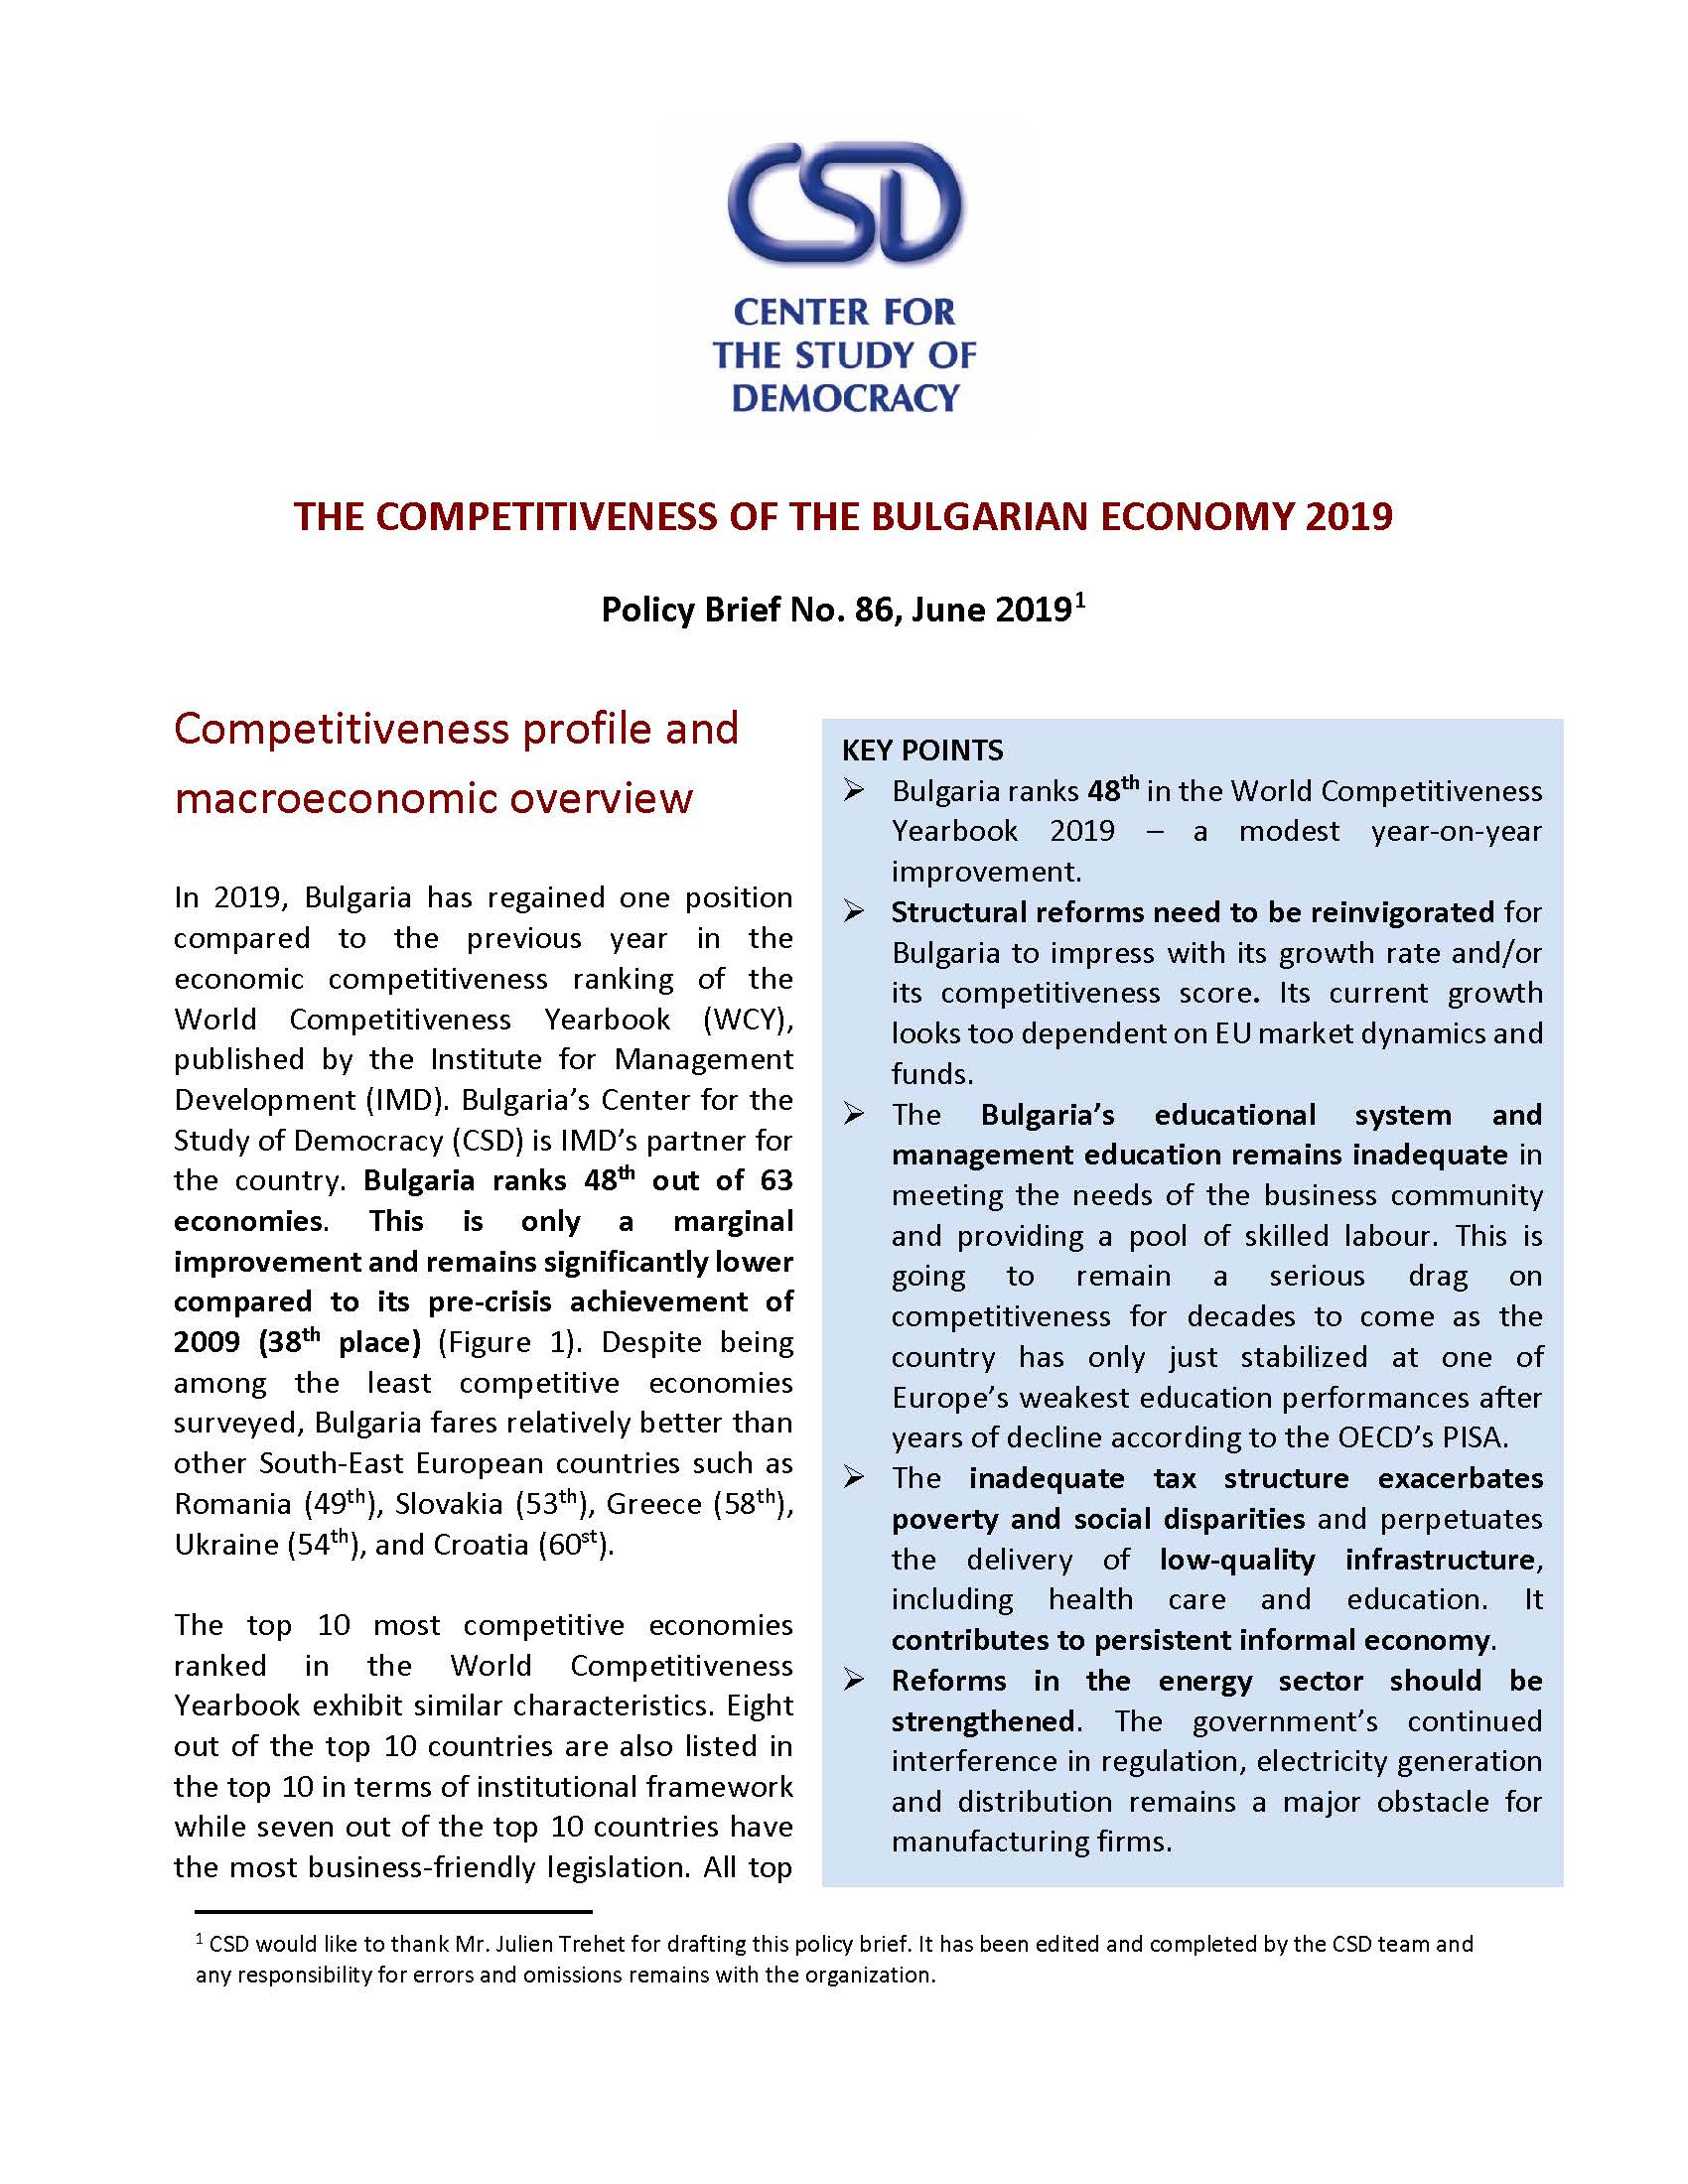 imd world competitiveness yearbook 2019 pdf